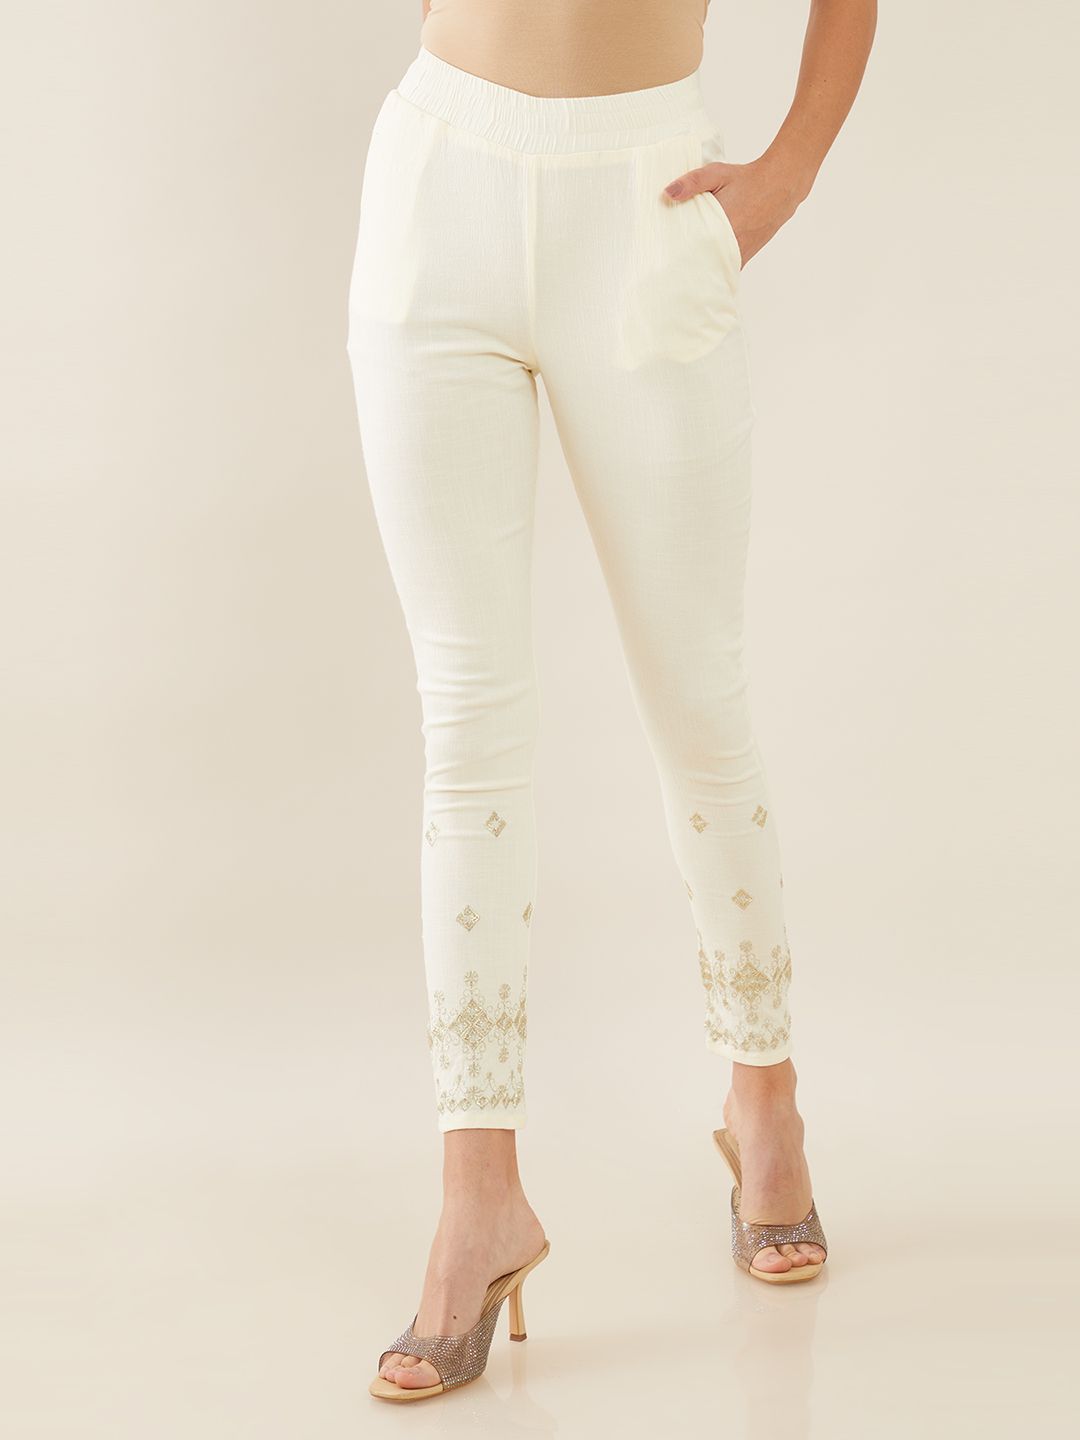 Dollar Missy  Off White Cotton Straight Womens Casual Pants  Pack of 1    Buy Dollar Missy  Off White Cotton Straight Womens Casual Pants  Pack  of 1  Online at Best Prices in India on Snapdeal